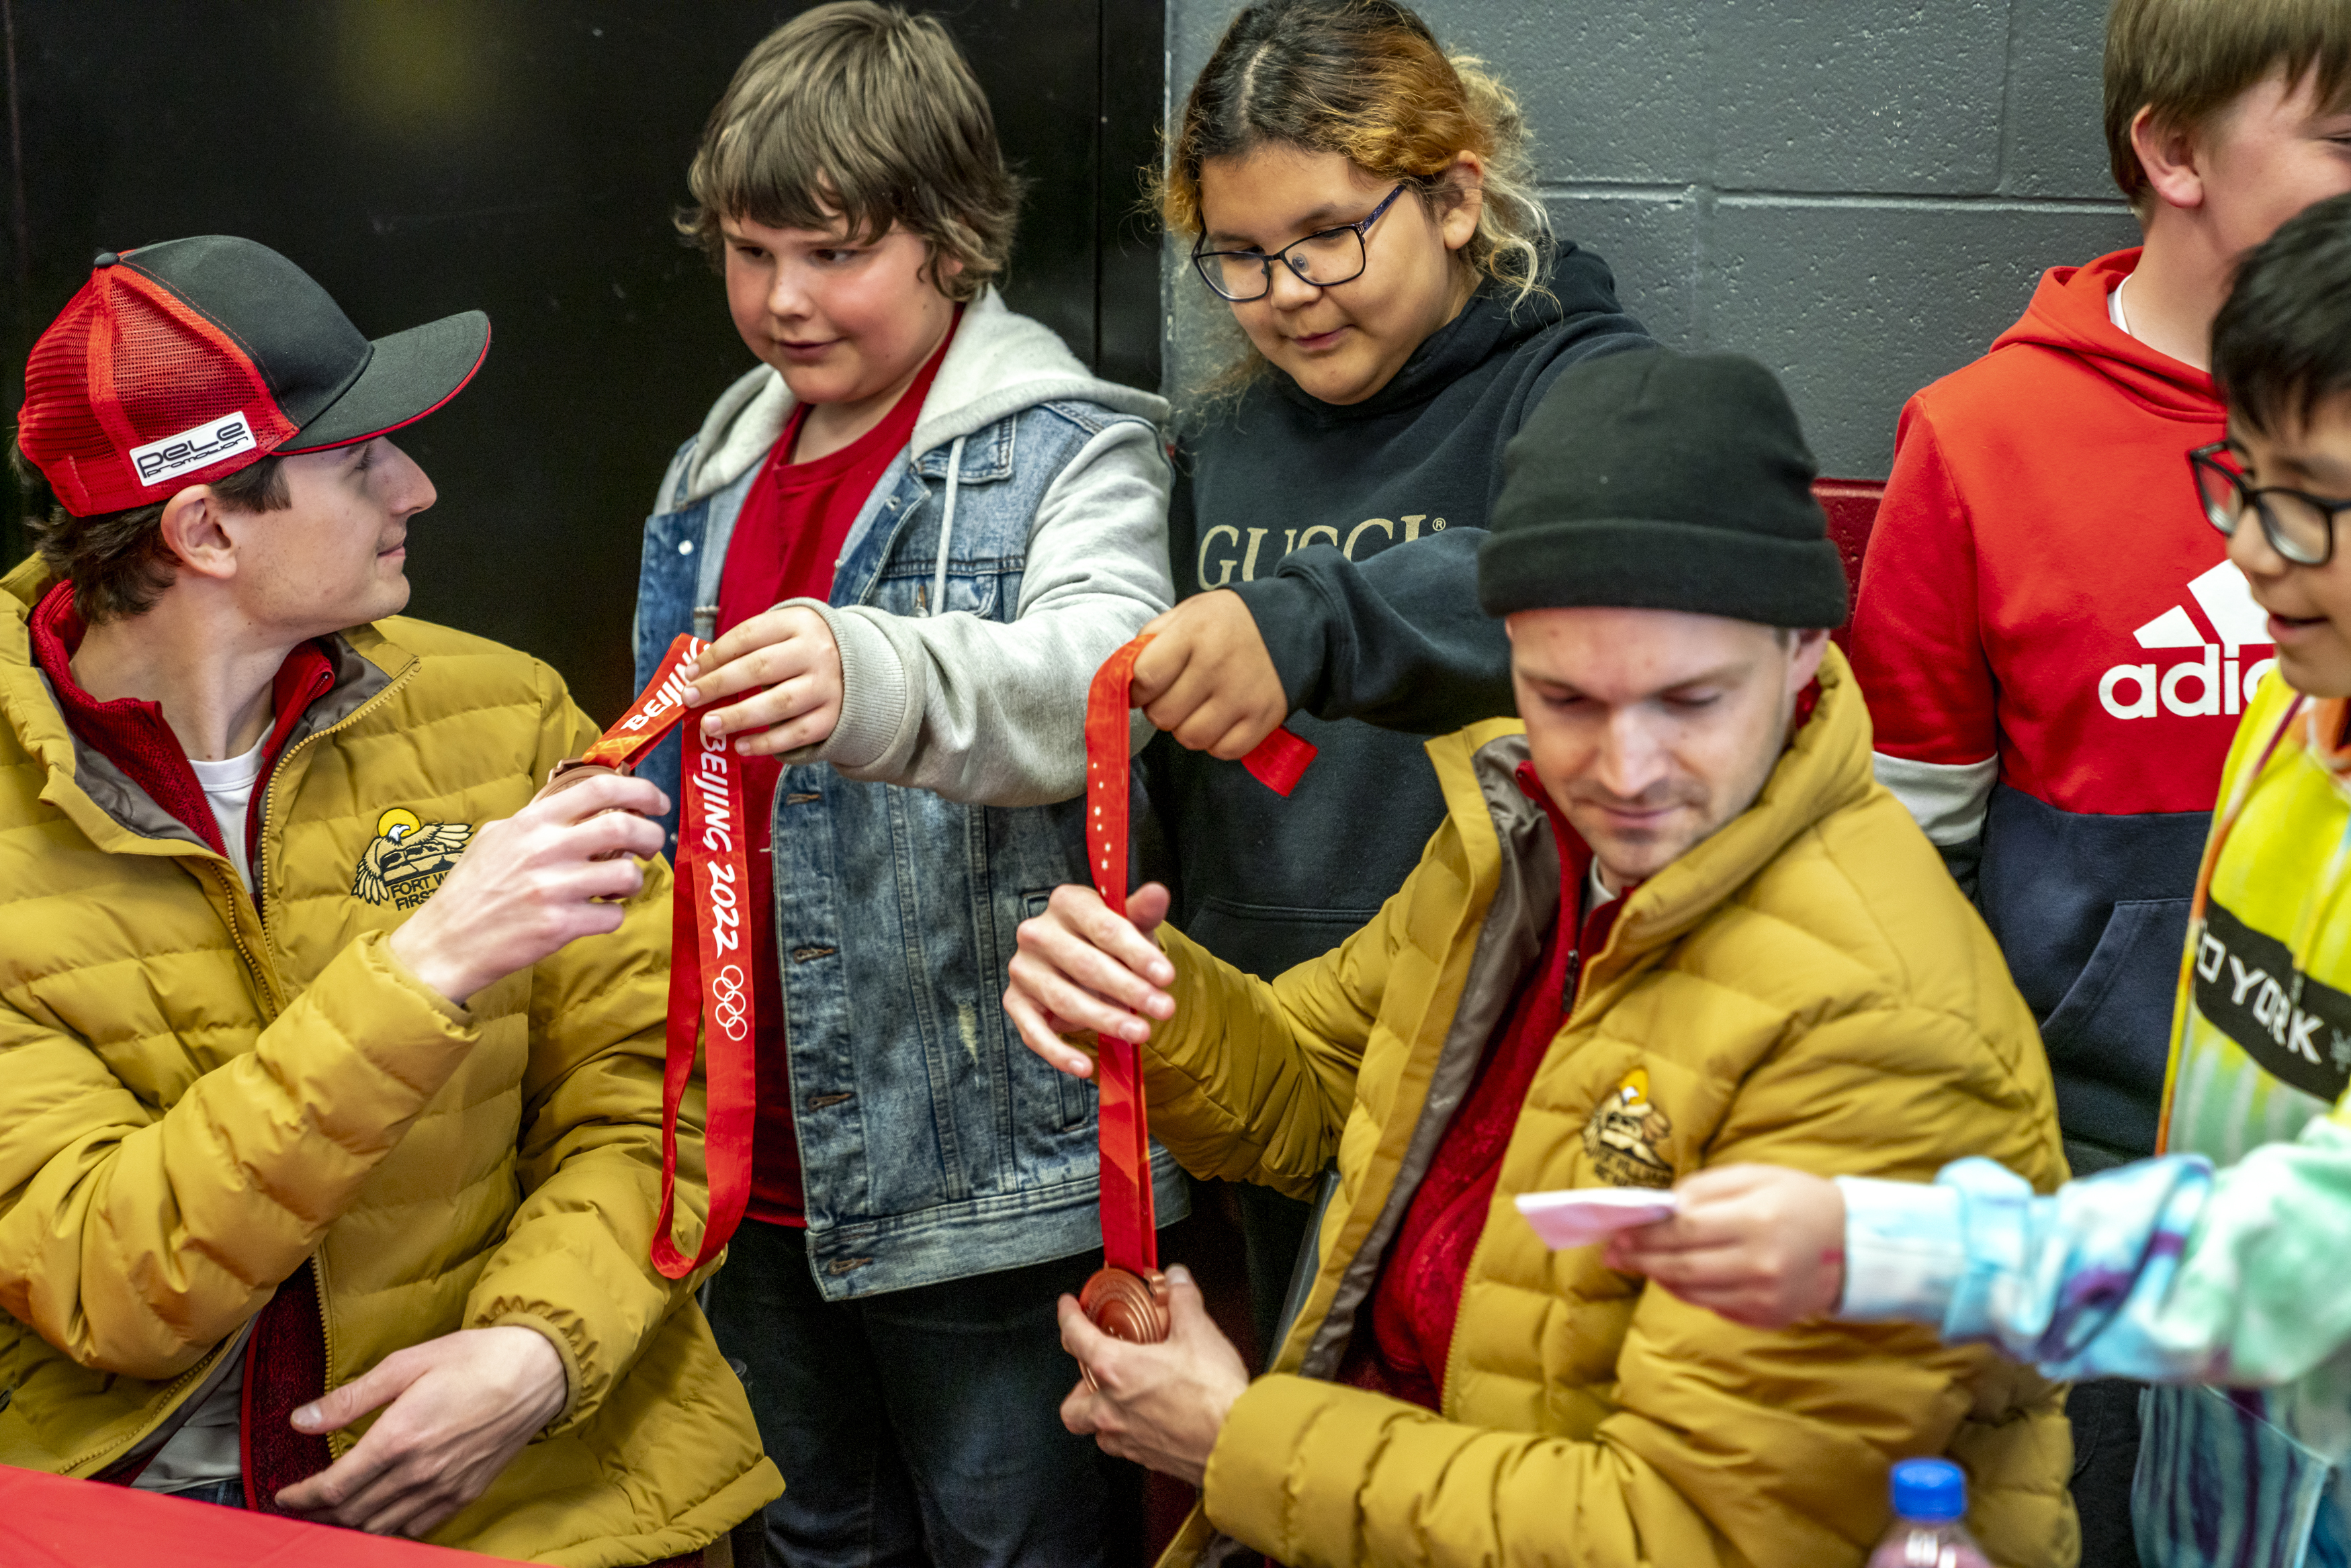 Mackenzie Boyd-Clowes and Matthew Soukup let Indigenous youth hold their Olympic bronze medals